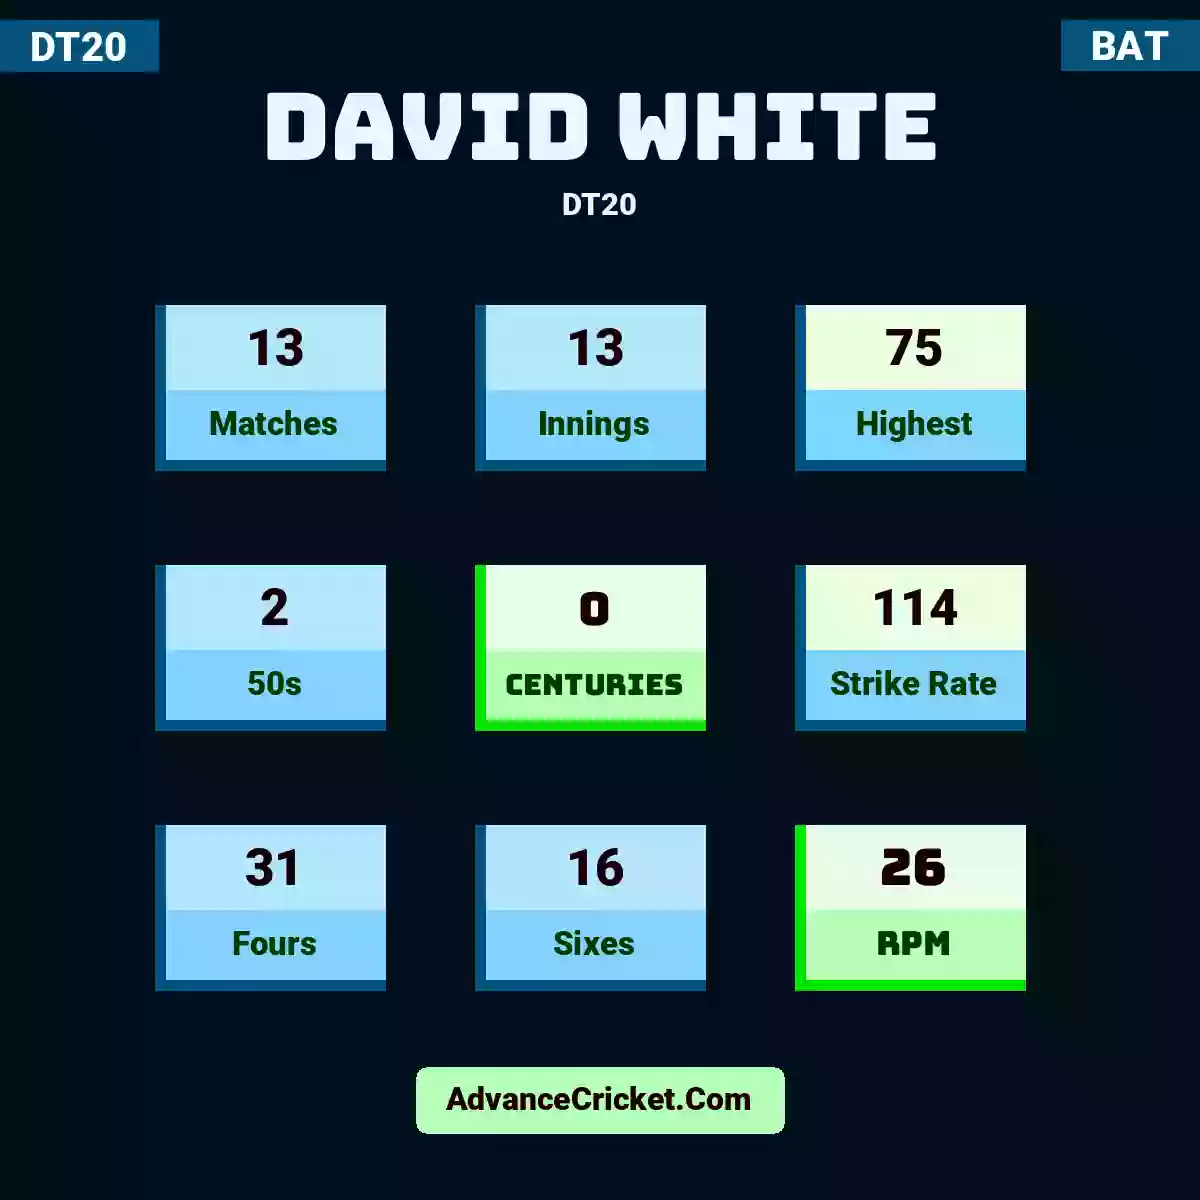 David White DT20 , David White played 13 matches, scored 75 runs as highest, 2 half-centuries, and 0 centuries, with a strike rate of 114. D.White hit 31 fours and 16 sixes, with an RPM of 26.